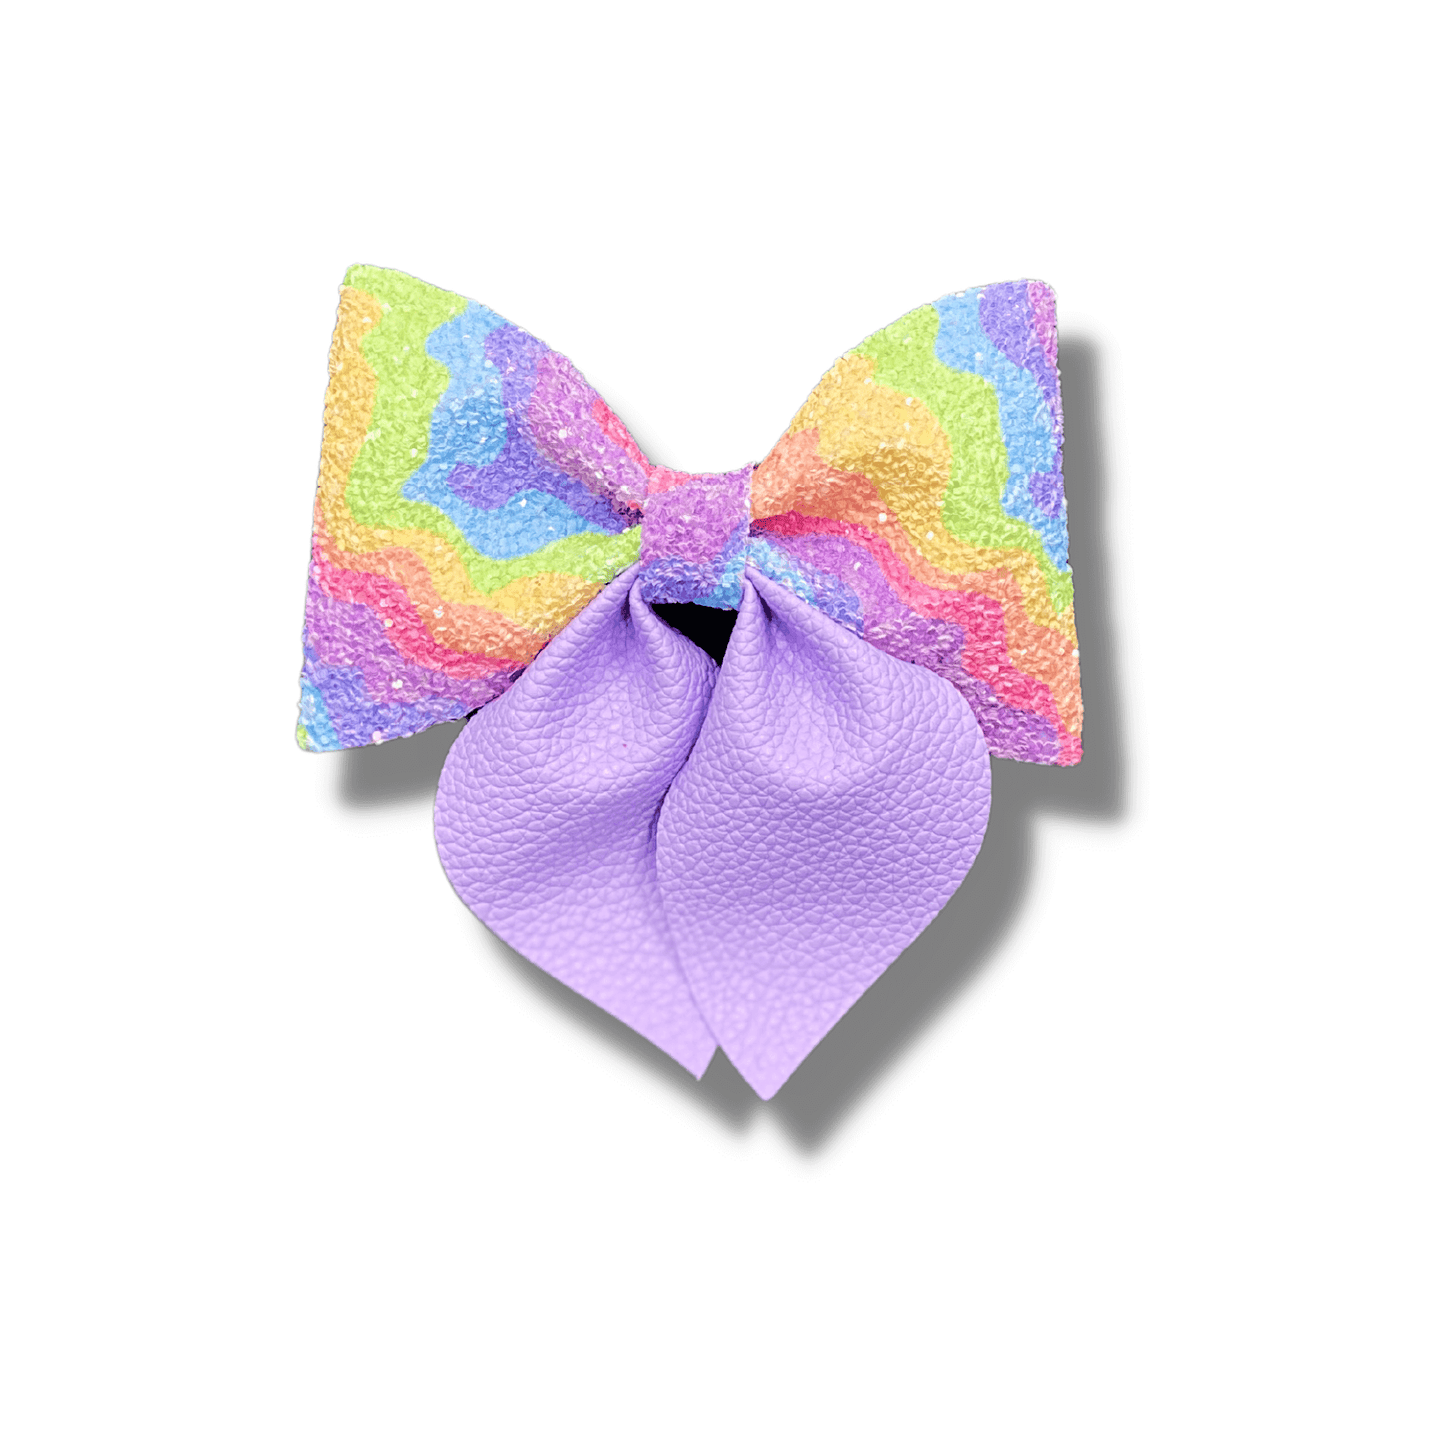 Sailor dog bow fashion accessory, let's pawty